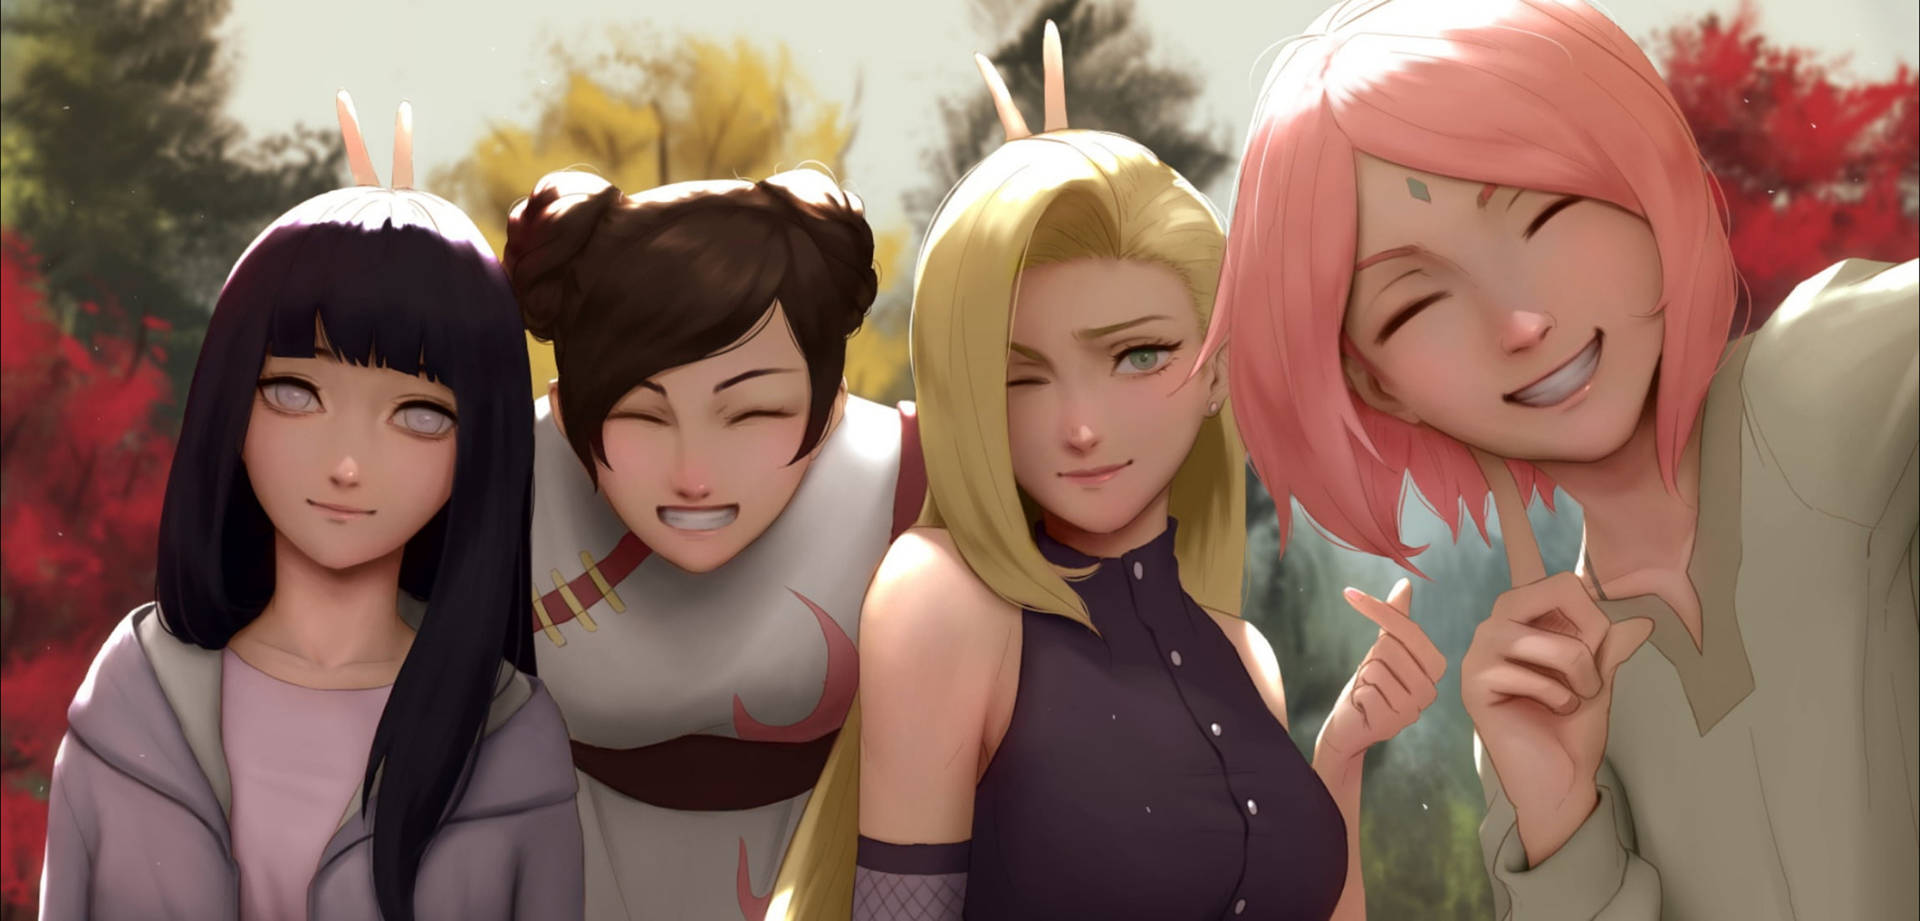 Engaging 4k Wallpaper Featuring Iconic Naruto Female Characters Background